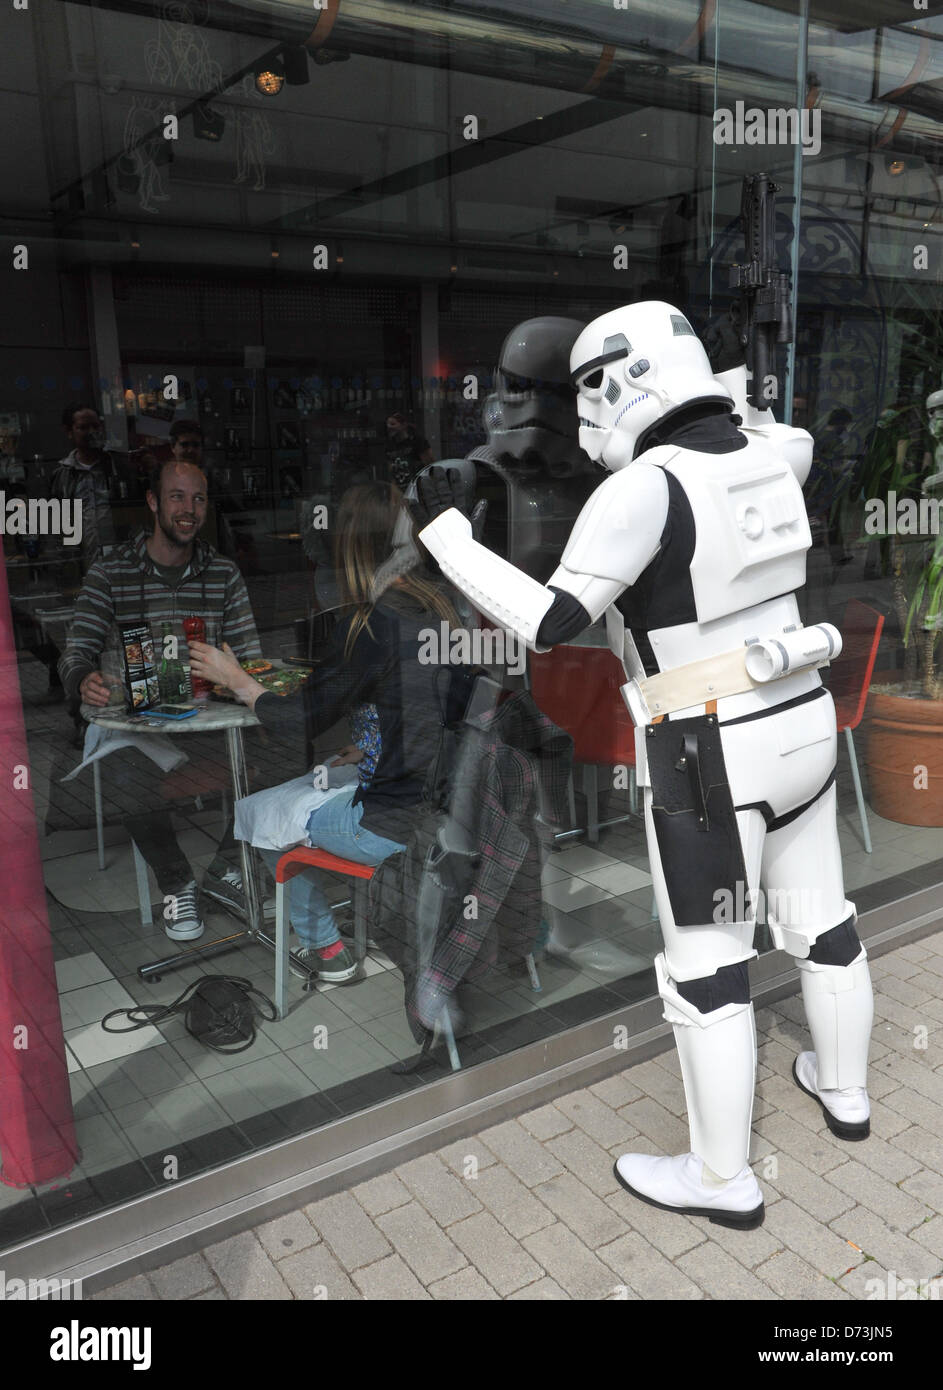 Stratford, London, UK. 28th April 2013. A 'Storm Trooper' from Star Wars intimidates people in Pizza Express at the costume parade. The Sci-Fi-London Costume Parade opens the 12th annual International Festival of Science Fiction and Fantastic Film held at Stratford Picture House in East London. Alamy Live News Stock Photo